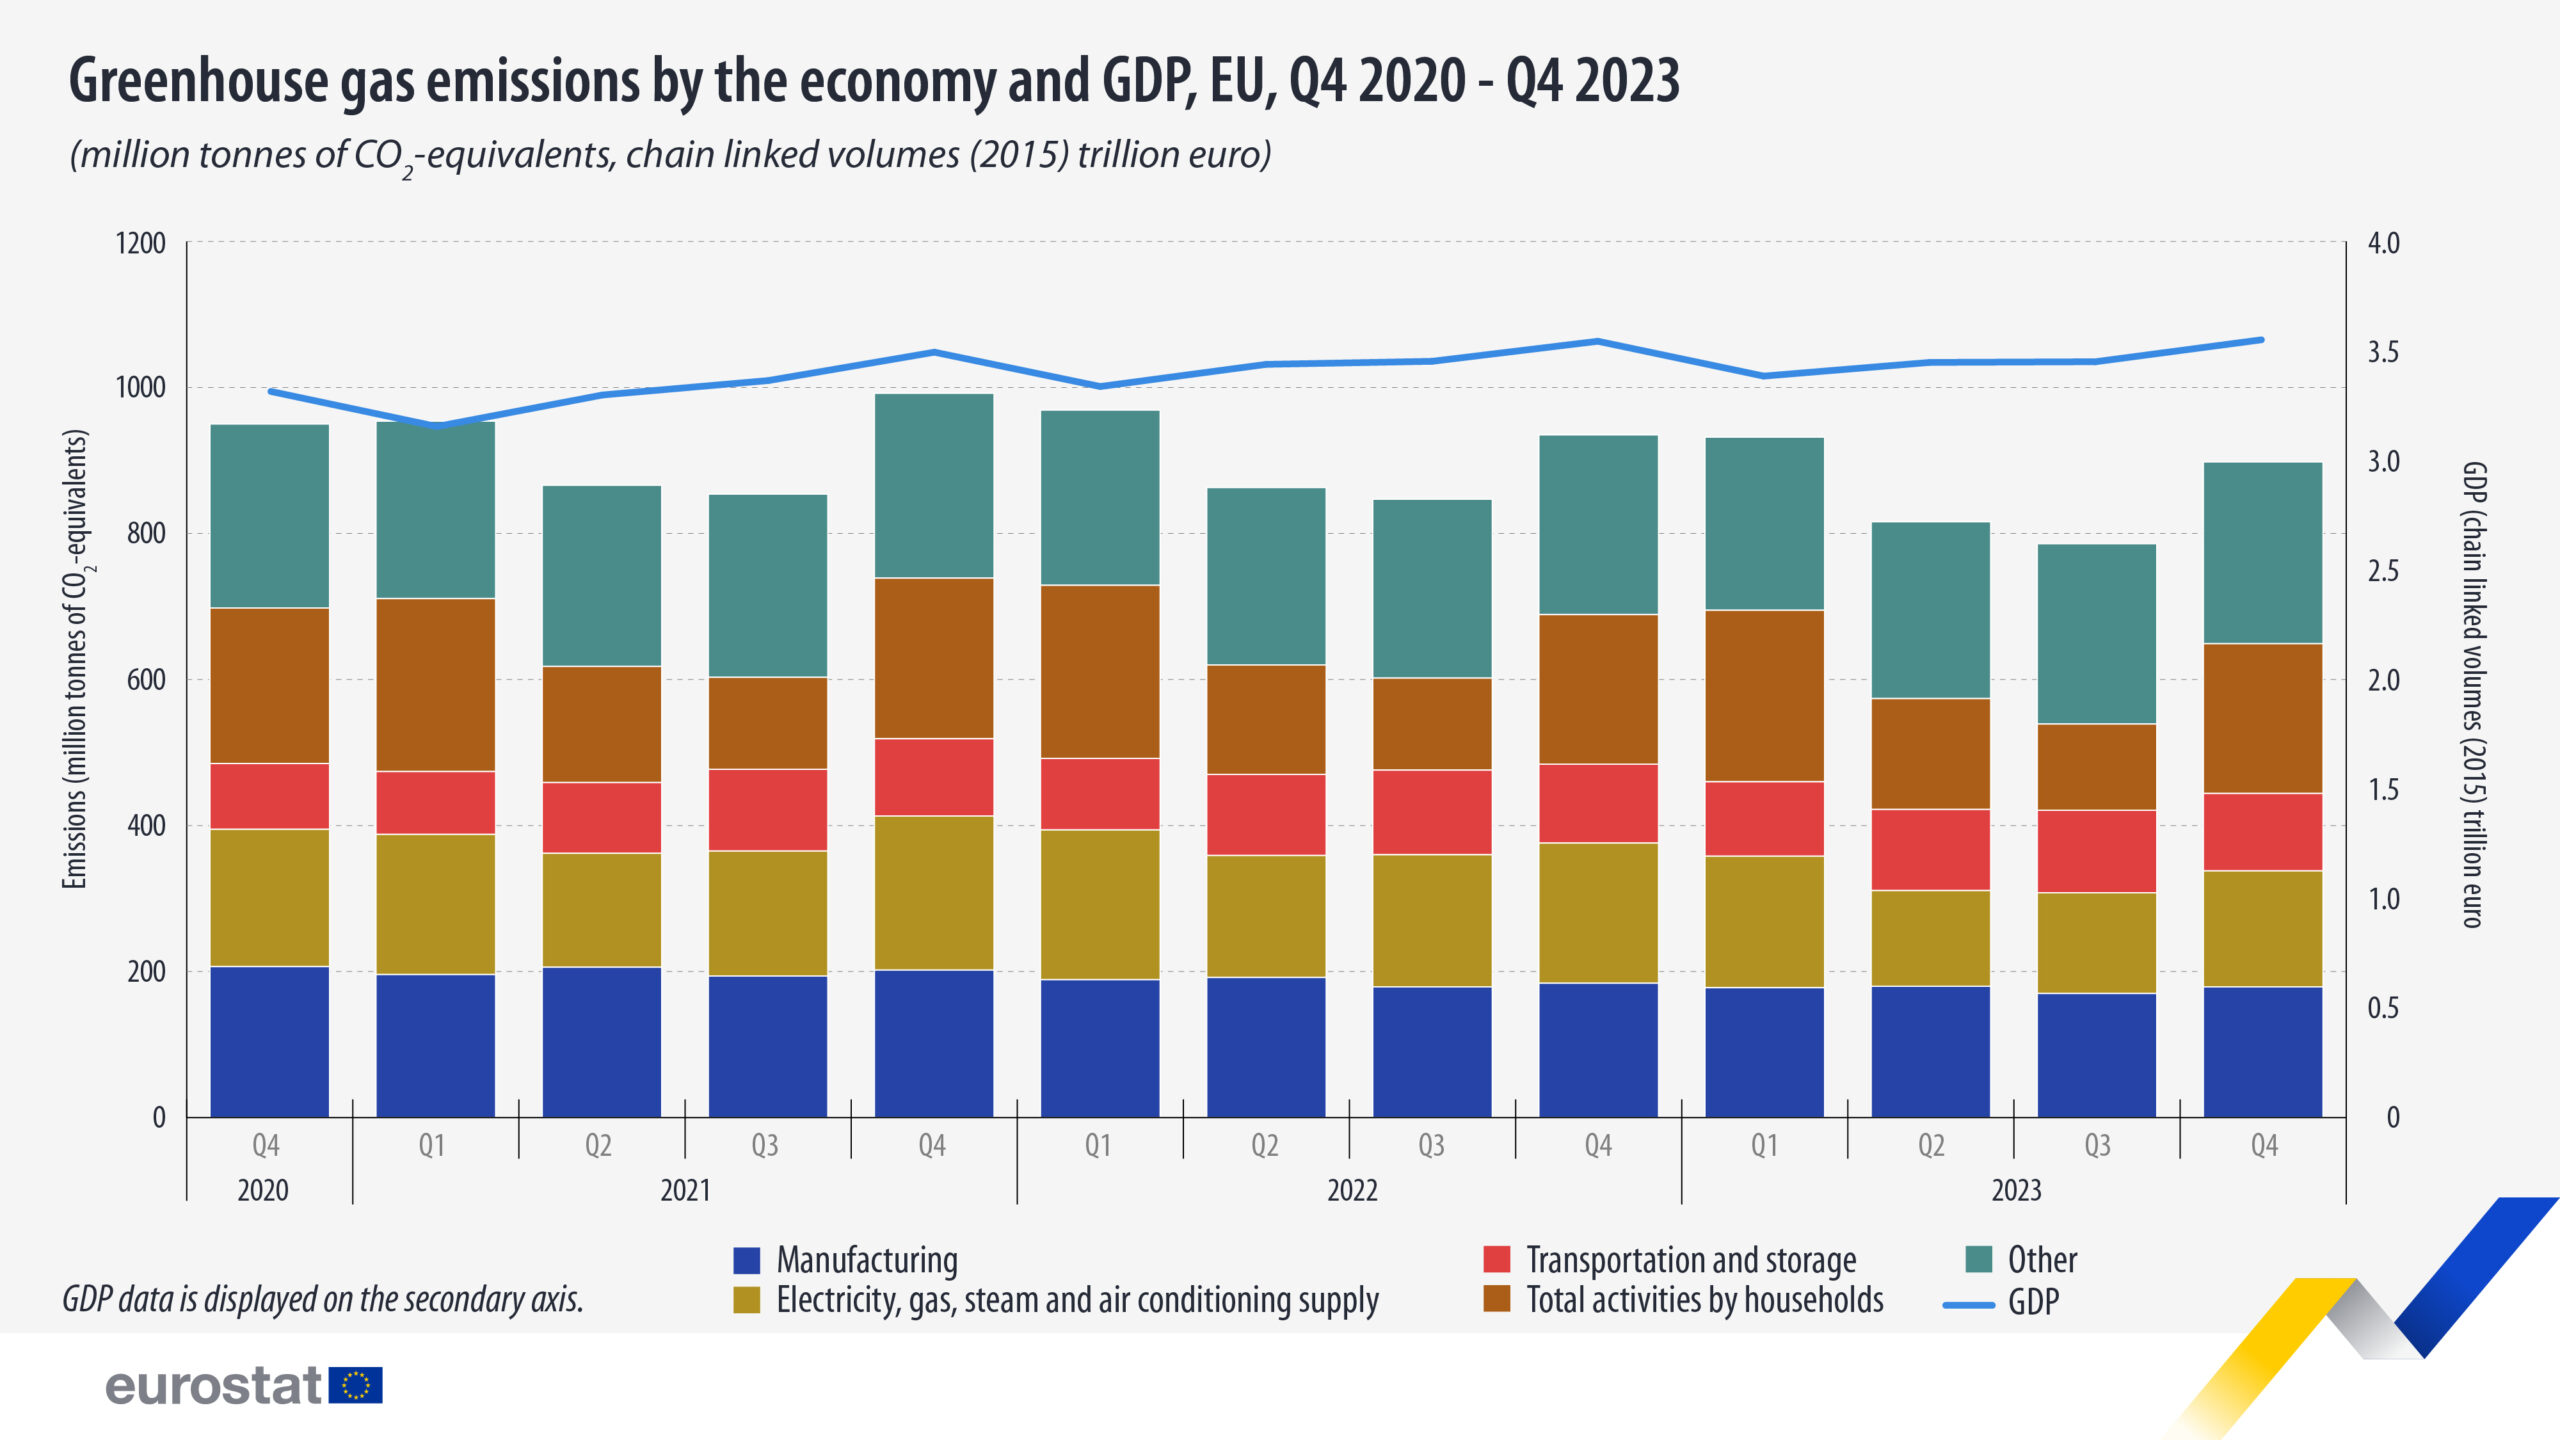 The EU economy reduces greenhouse gas emissions by 4.0%